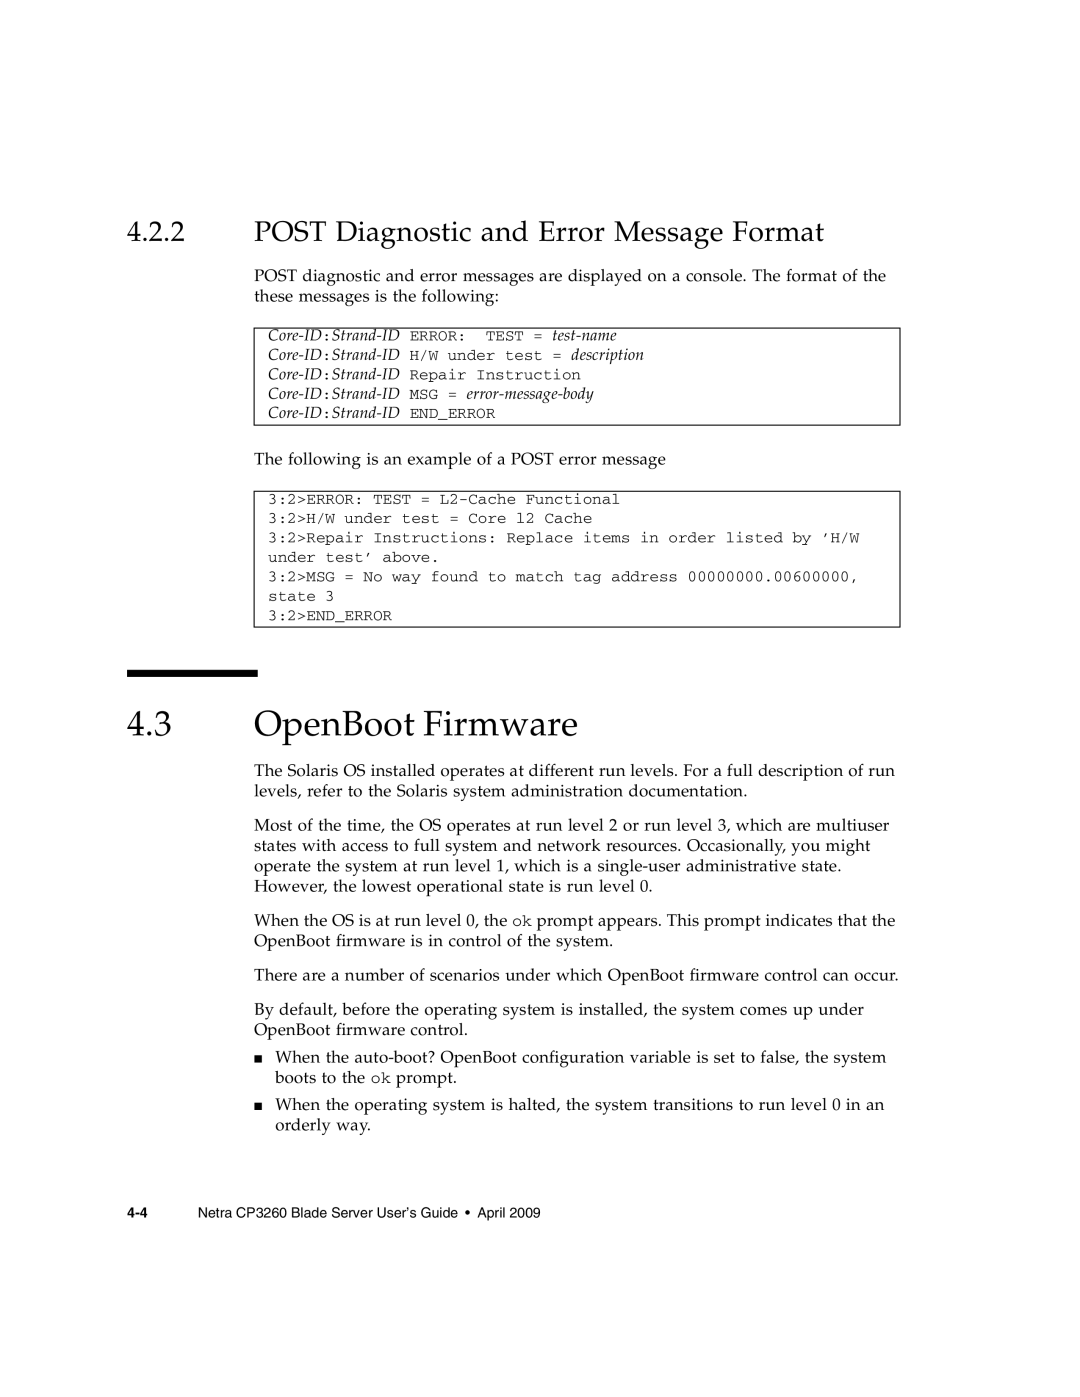 Sun Microsystems CP3260 manual OpenBoot Firmware, POST Diagnostic and Error Message Format 